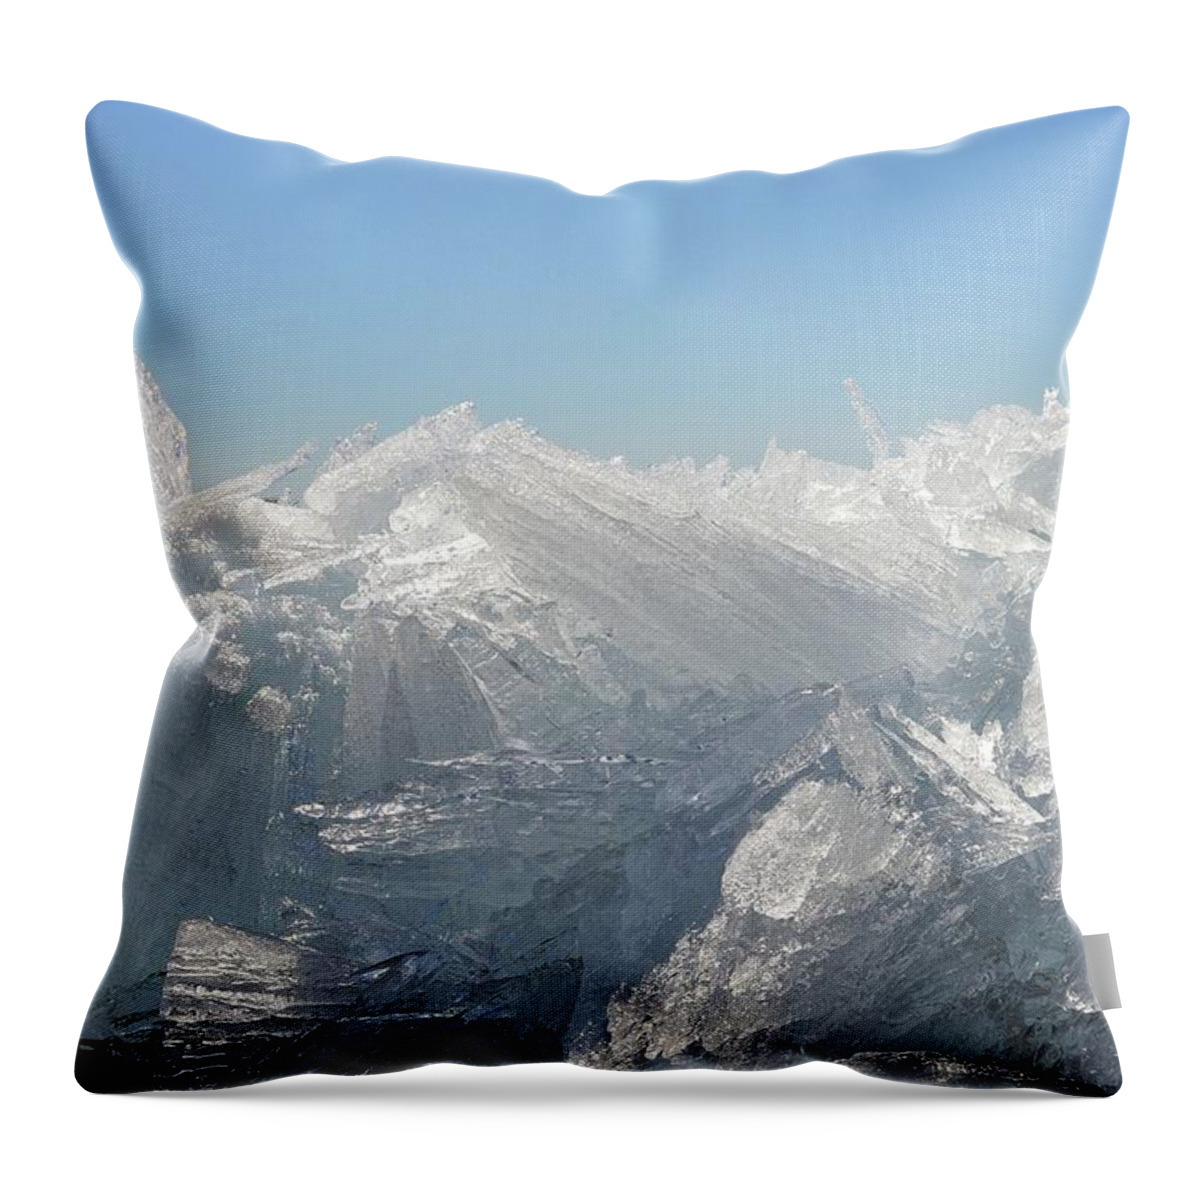 Abstract Throw Pillow featuring the digital art Among The Ice Crystals by Lyle Crump